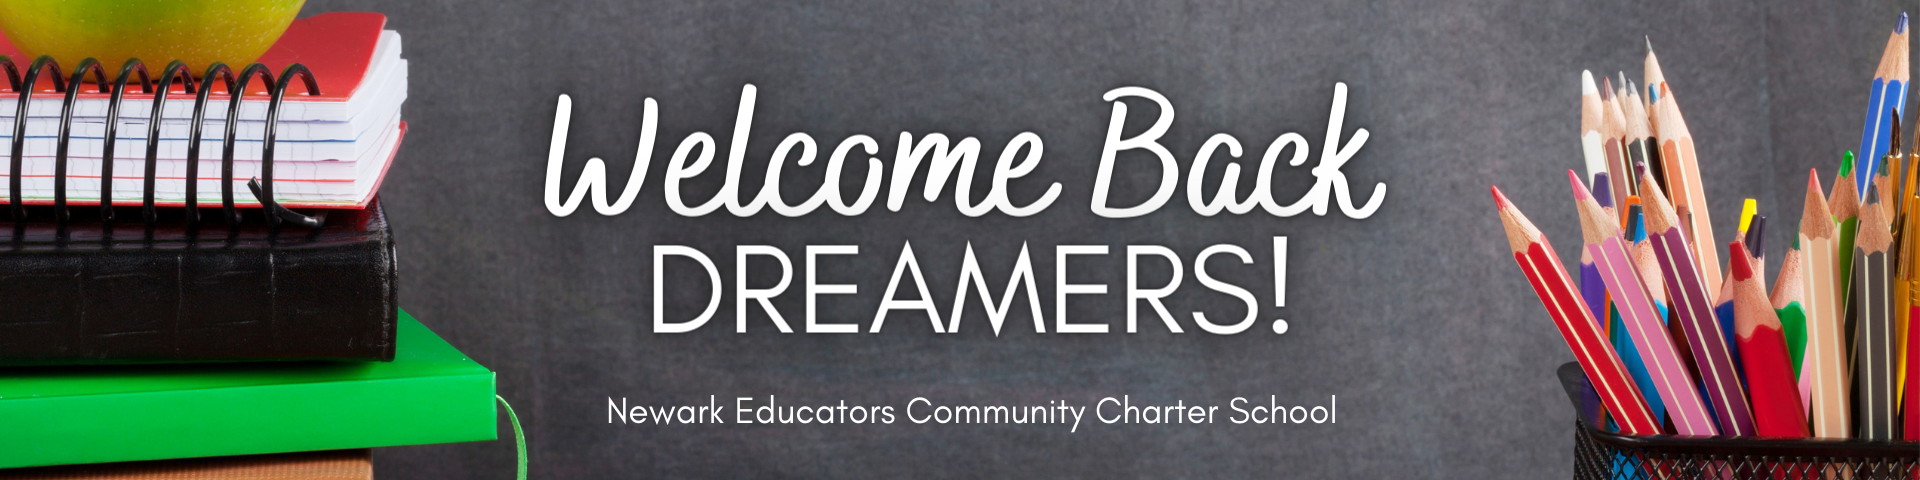 Welcome Back Dreamers!